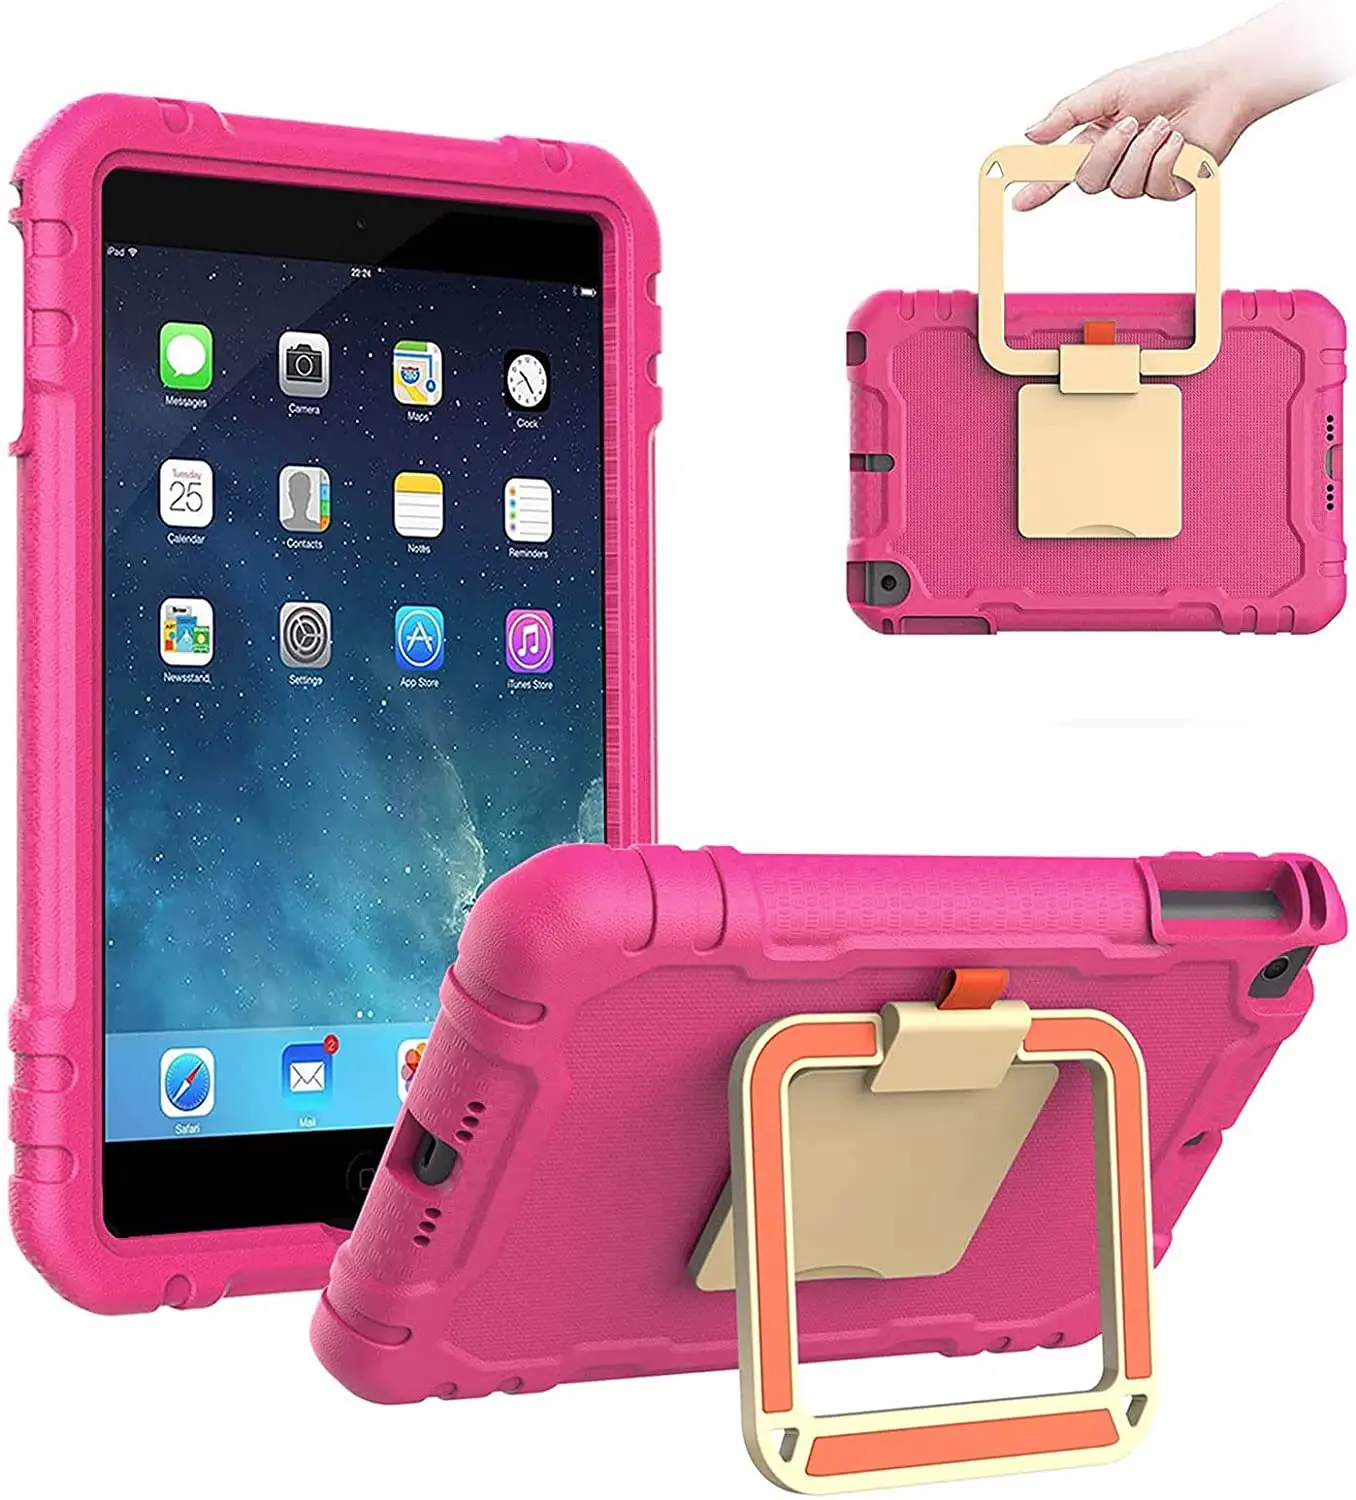 Kids Case for 7.9-inch Apple iPad Mini 1 2 3 4 5 with 360 Full Rotating Convenient Handle Stand for Hands-Free Shockproof & Kids